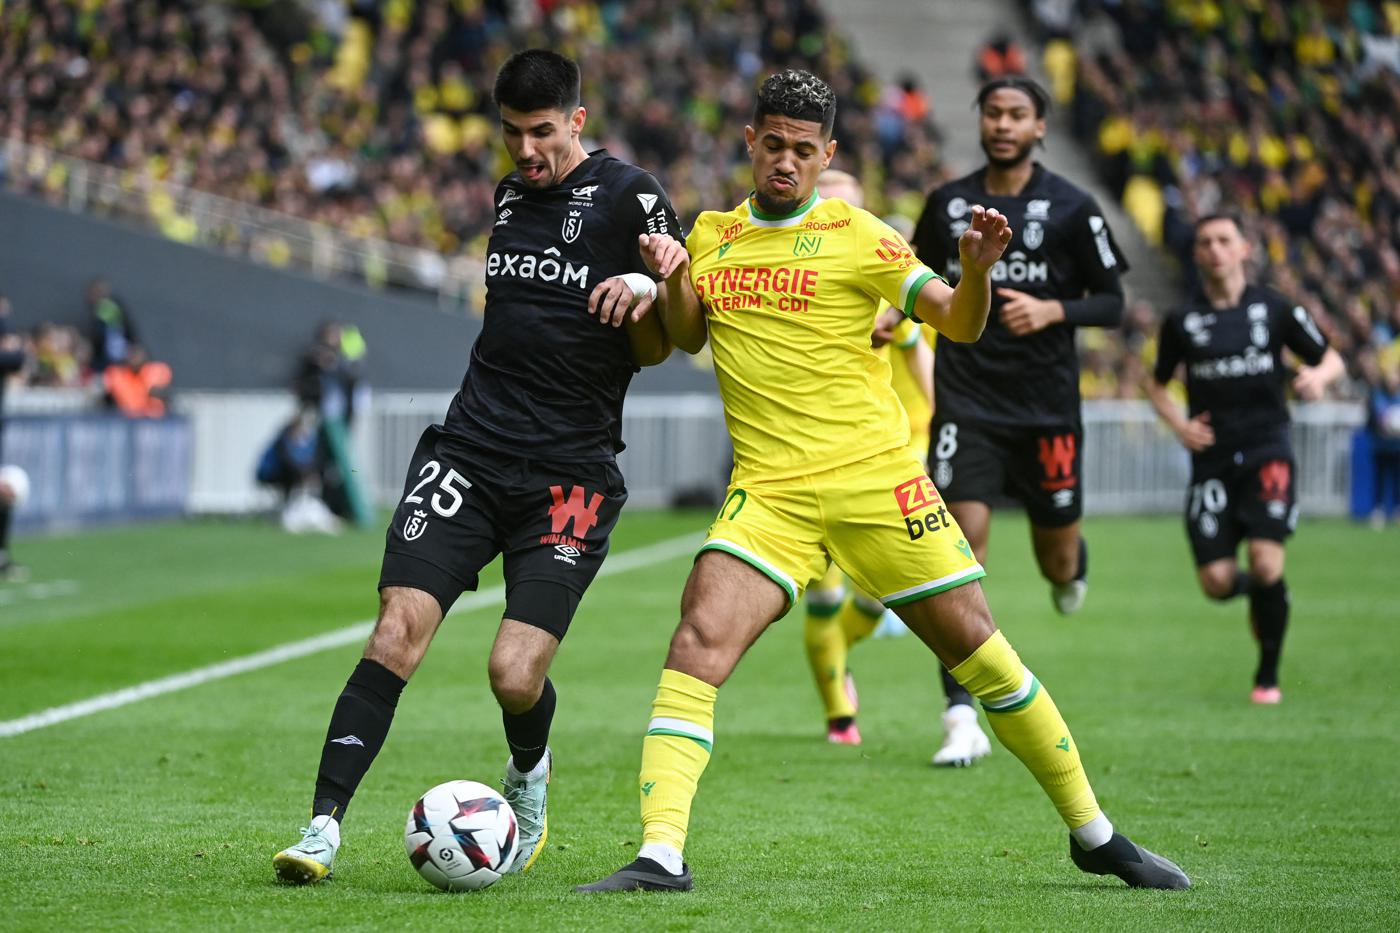 Nantes - Reims - 0:3. French Championship, 29th round. Match review, statistics